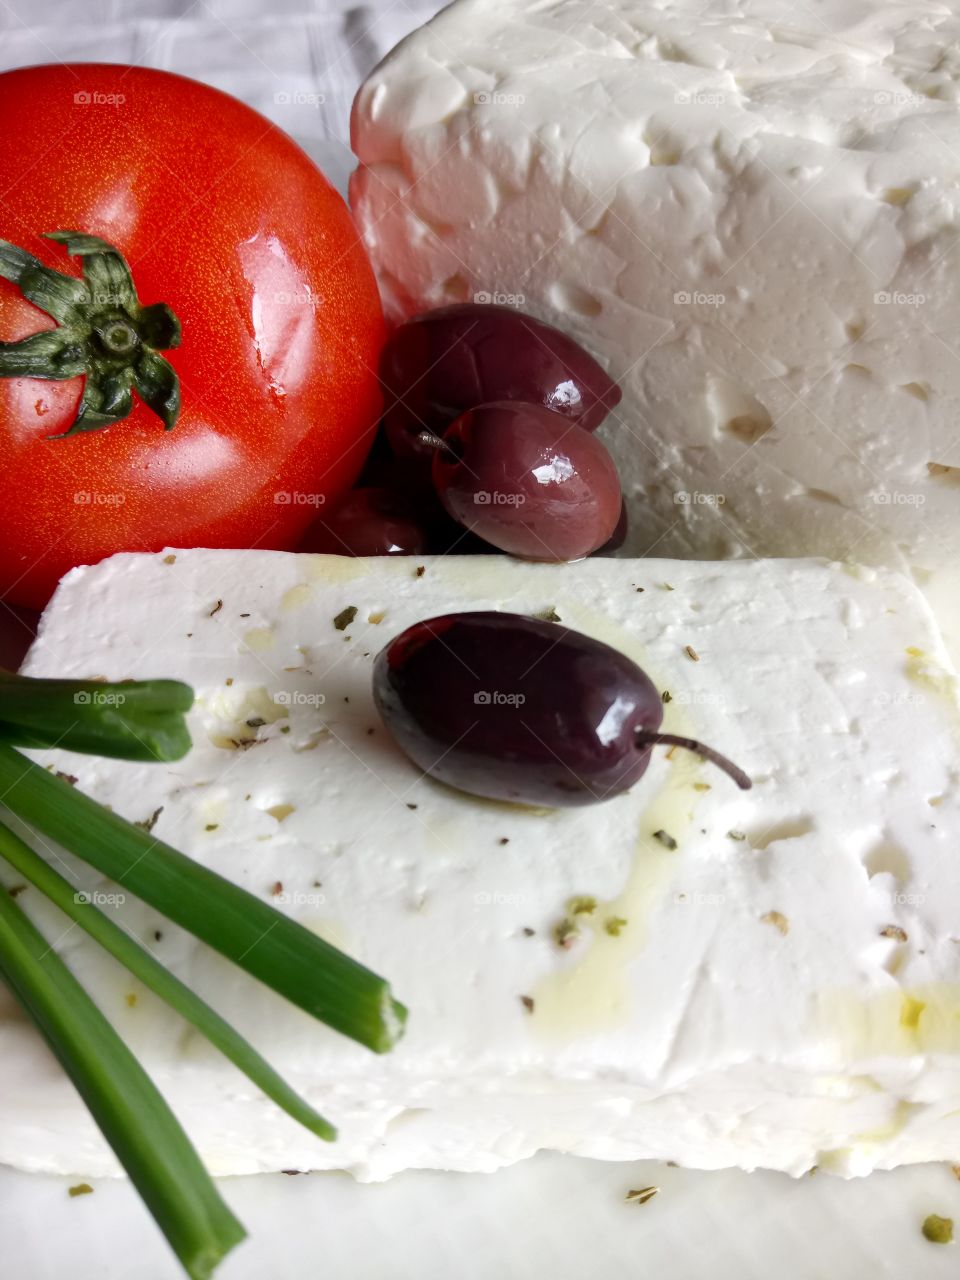 Goat cheese and tomato with olive oil